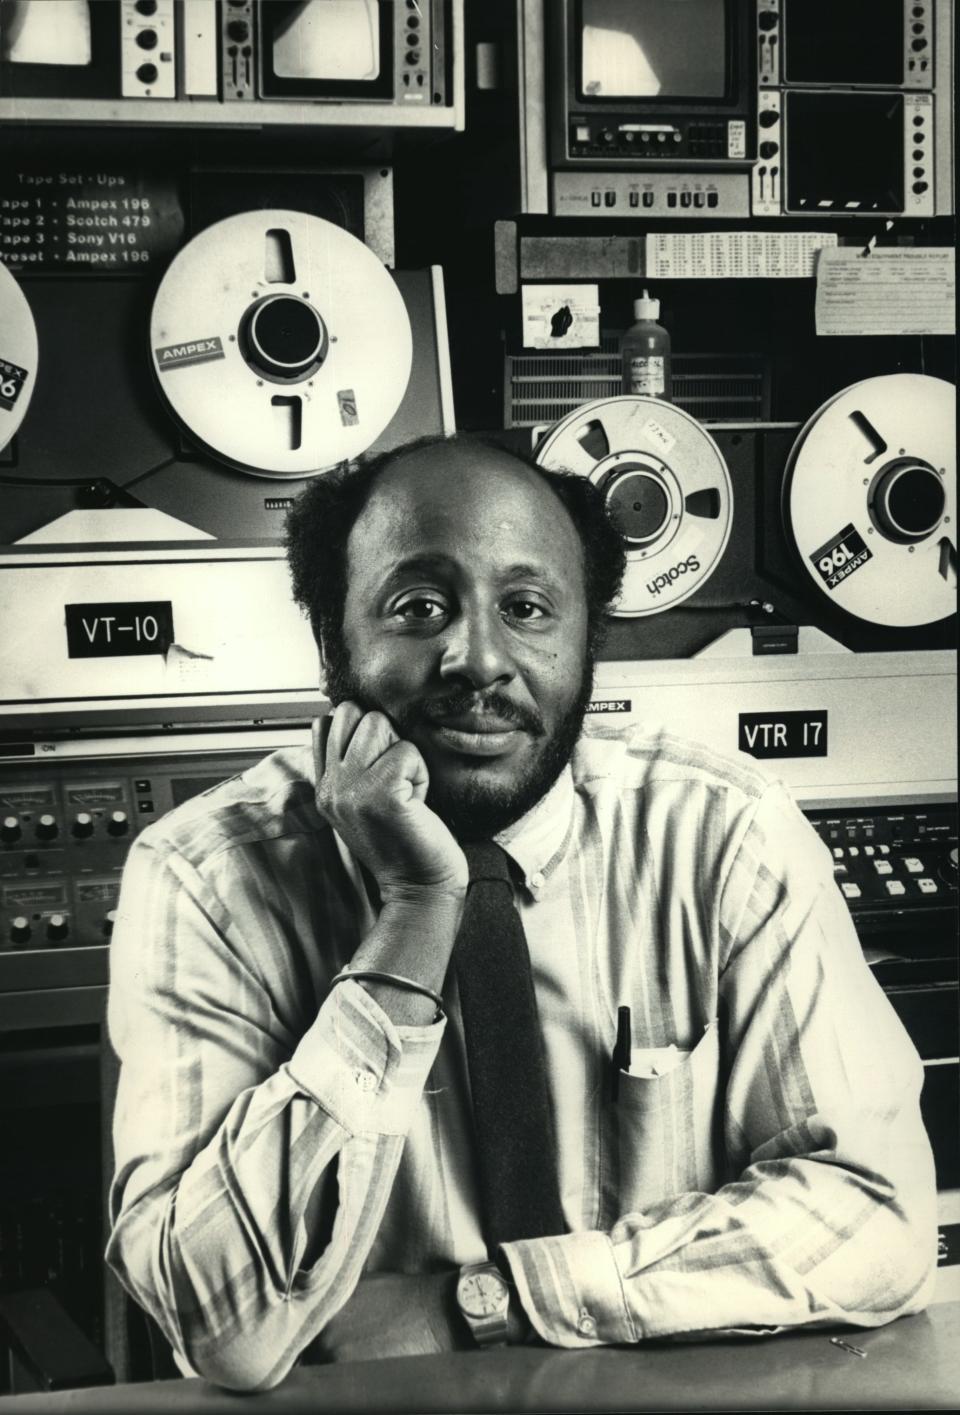 Clayborn Benson worked for WTMJ-TV as a cameraman, editor and producer for almost 40 years. During his time there, he produced a documentary called "Black Communities" that explored Black housing, migration, settlements and trade skills in the U.S. Benson said producing this documentary was what led to his creation of the Wisconsin Black Historical Society and Museum.